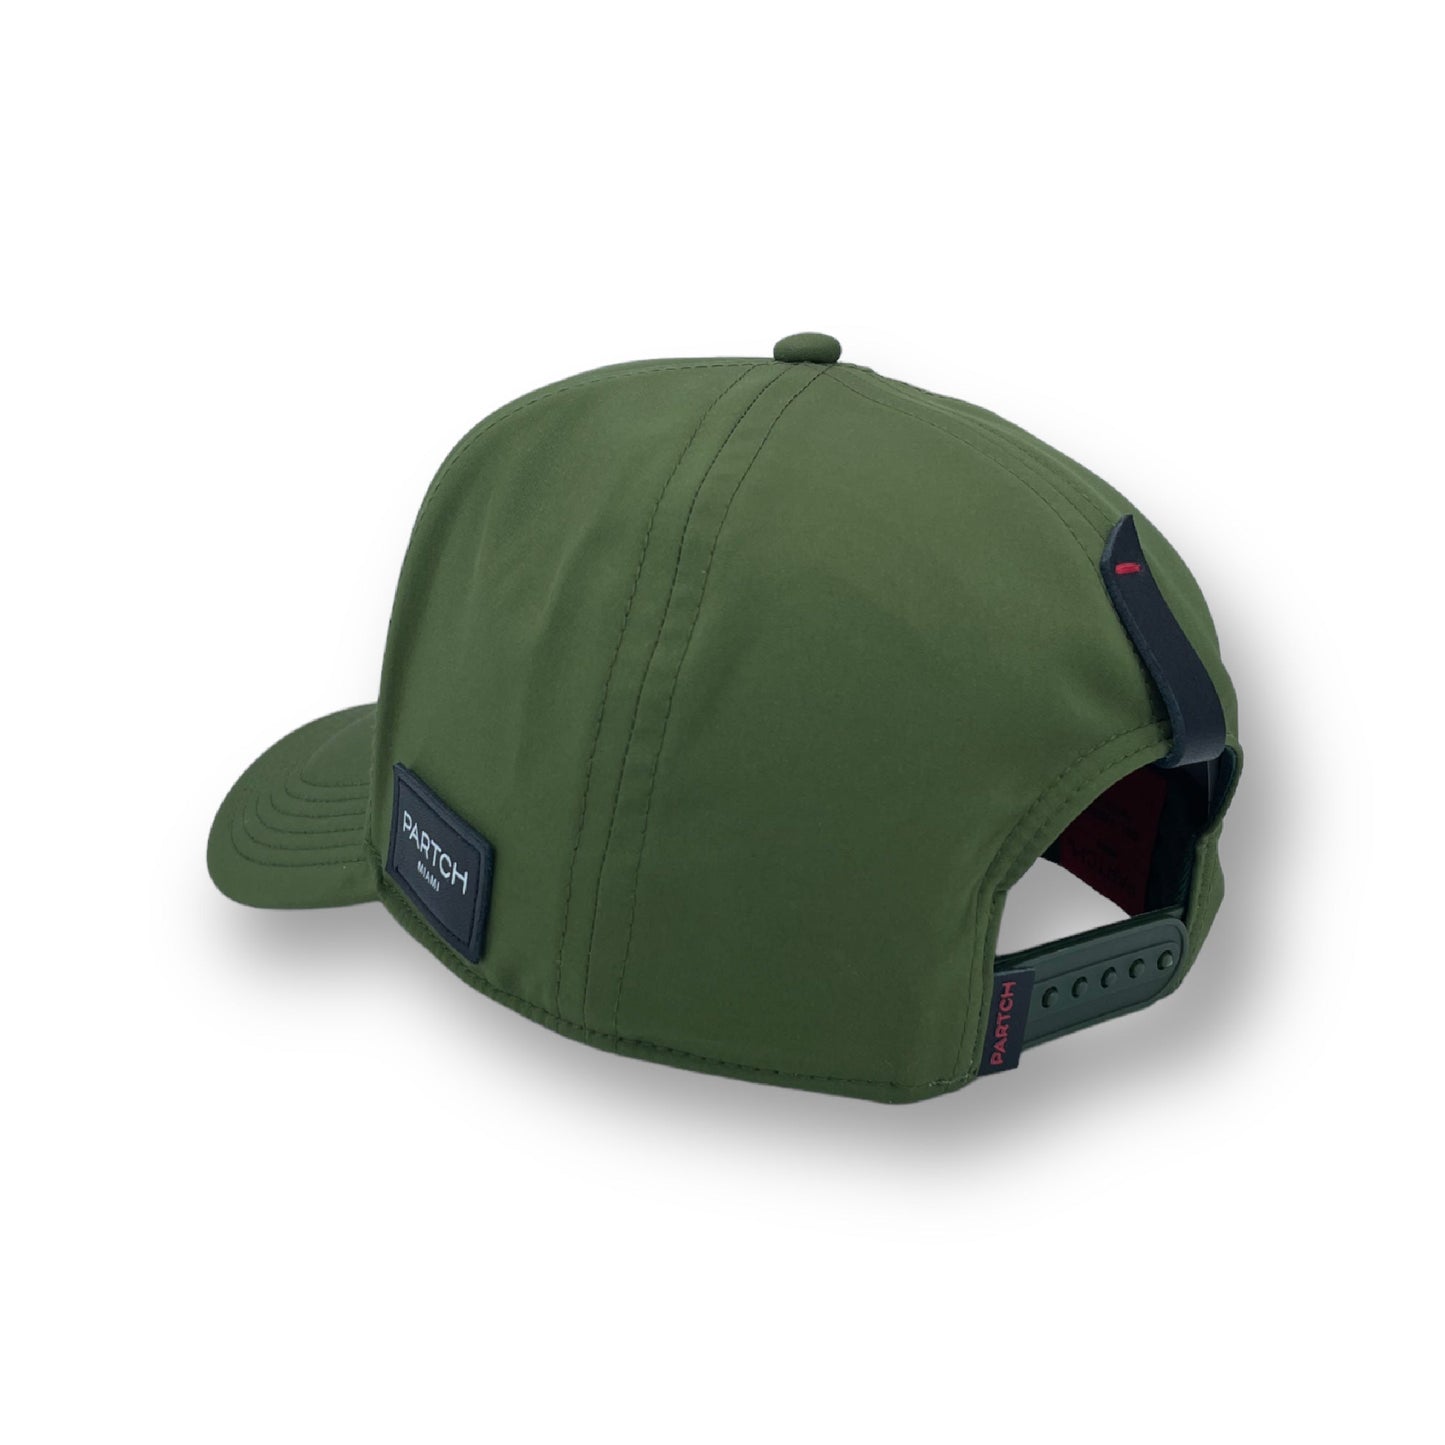 Partch fashion trucker cap in green kaki and leather